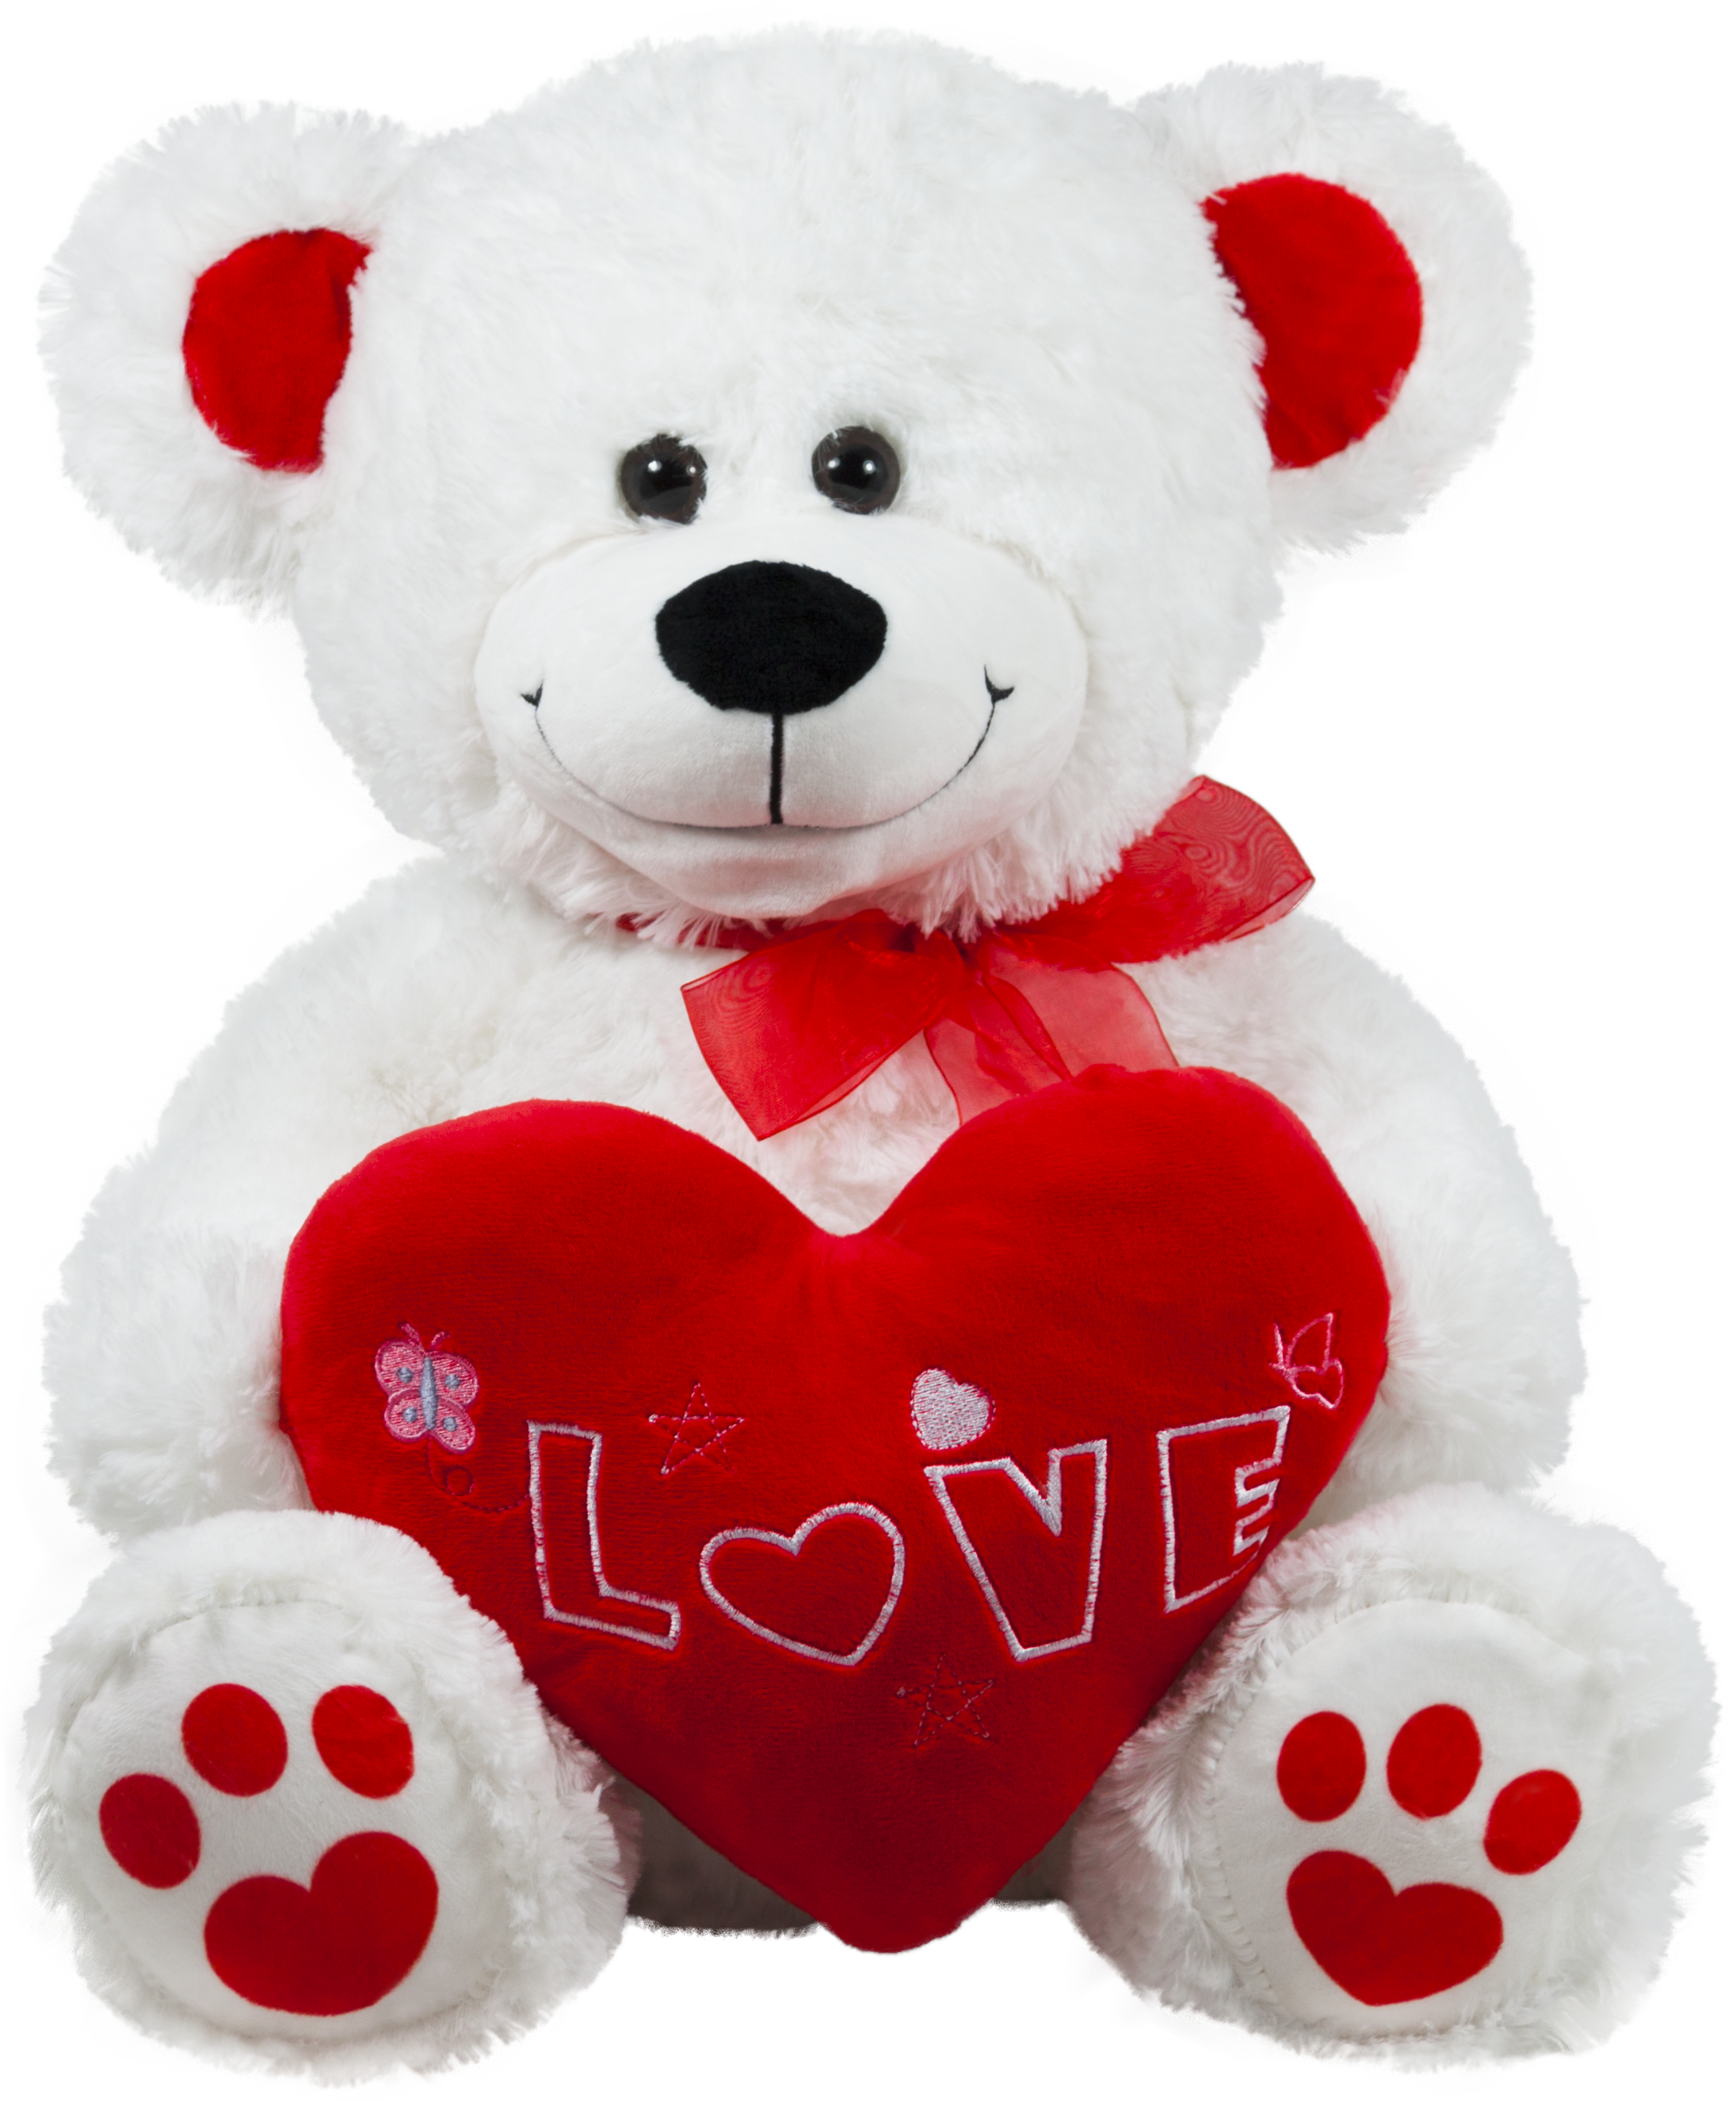 Bear with red heart - White